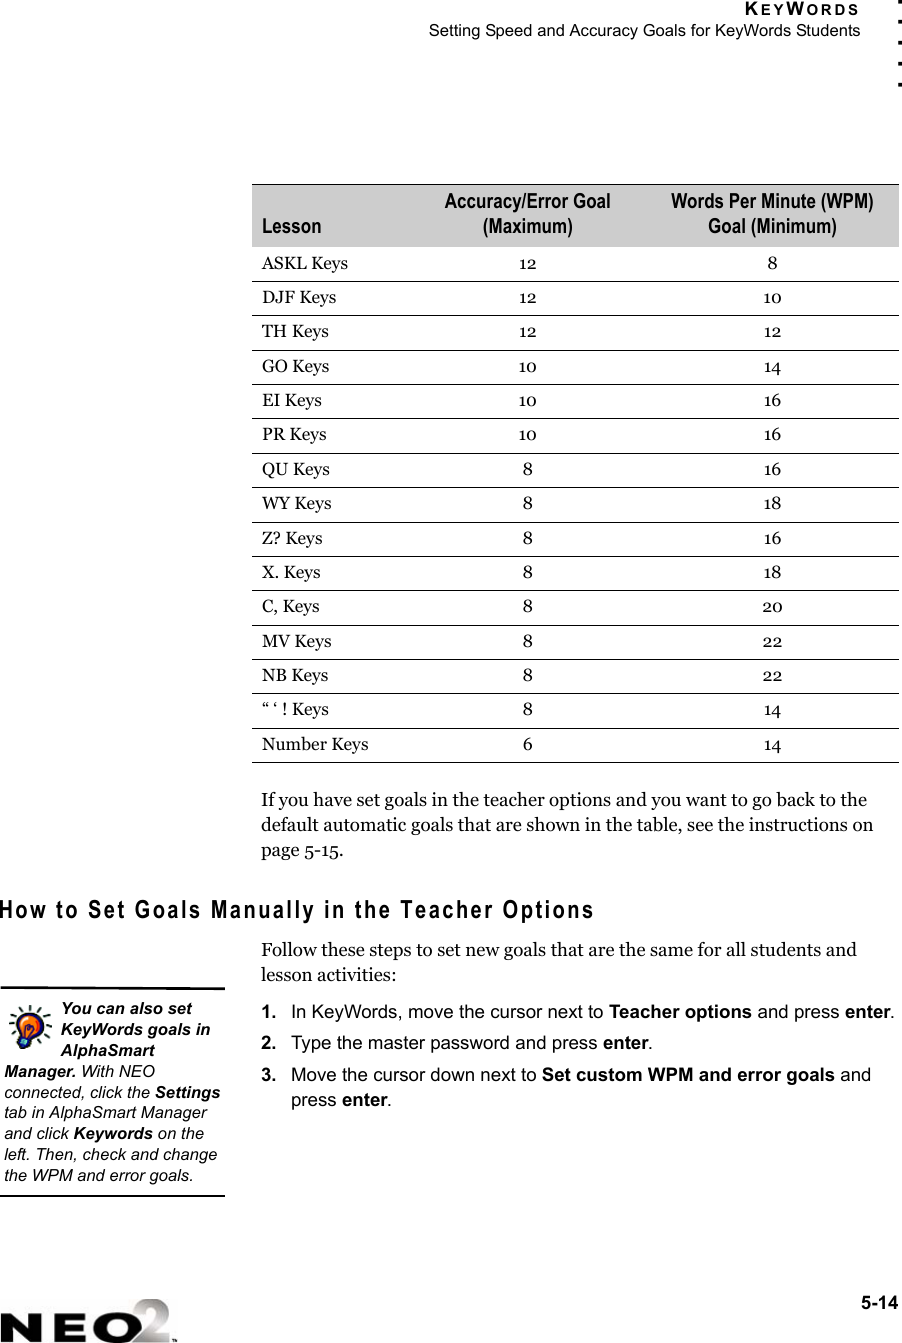 KEYWORDSSetting Speed and Accuracy Goals for KeyWords Students5-14. . . . .If you have set goals in the teacher options and you want to go back to the default automatic goals that are shown in the table, see the instructions on page 5-15.How to Set Goals Manually in the Teacher OptionsFollow these steps to set new goals that are the same for all students and lesson activities:1. In KeyWords, move the cursor next to Teacher options and press enter.2. Type the master password and press enter.3. Move the cursor down next to Set custom WPM and error goals and press enter.LessonAccuracy/Error Goal (Maximum)Words Per Minute (WPM) Goal (Minimum)ASKL Keys 12 8DJF Keys 12 10TH Keys 12 12GO Keys 10 14EI Keys 10 16PR Keys 10 16QU Keys 8 16WY Keys 8 18Z? Keys 8 16X. Keys 8 18C, Keys 8 20MV Keys 8 22NB Keys 8 22“ ‘ ! Keys 8 14Number Keys 6 14You can also set KeyWords goals in AlphaSmart Manager. With NEO connected, click the Settings tab in AlphaSmart Manager and click Keywords on the left. Then, check and change the WPM and error goals.